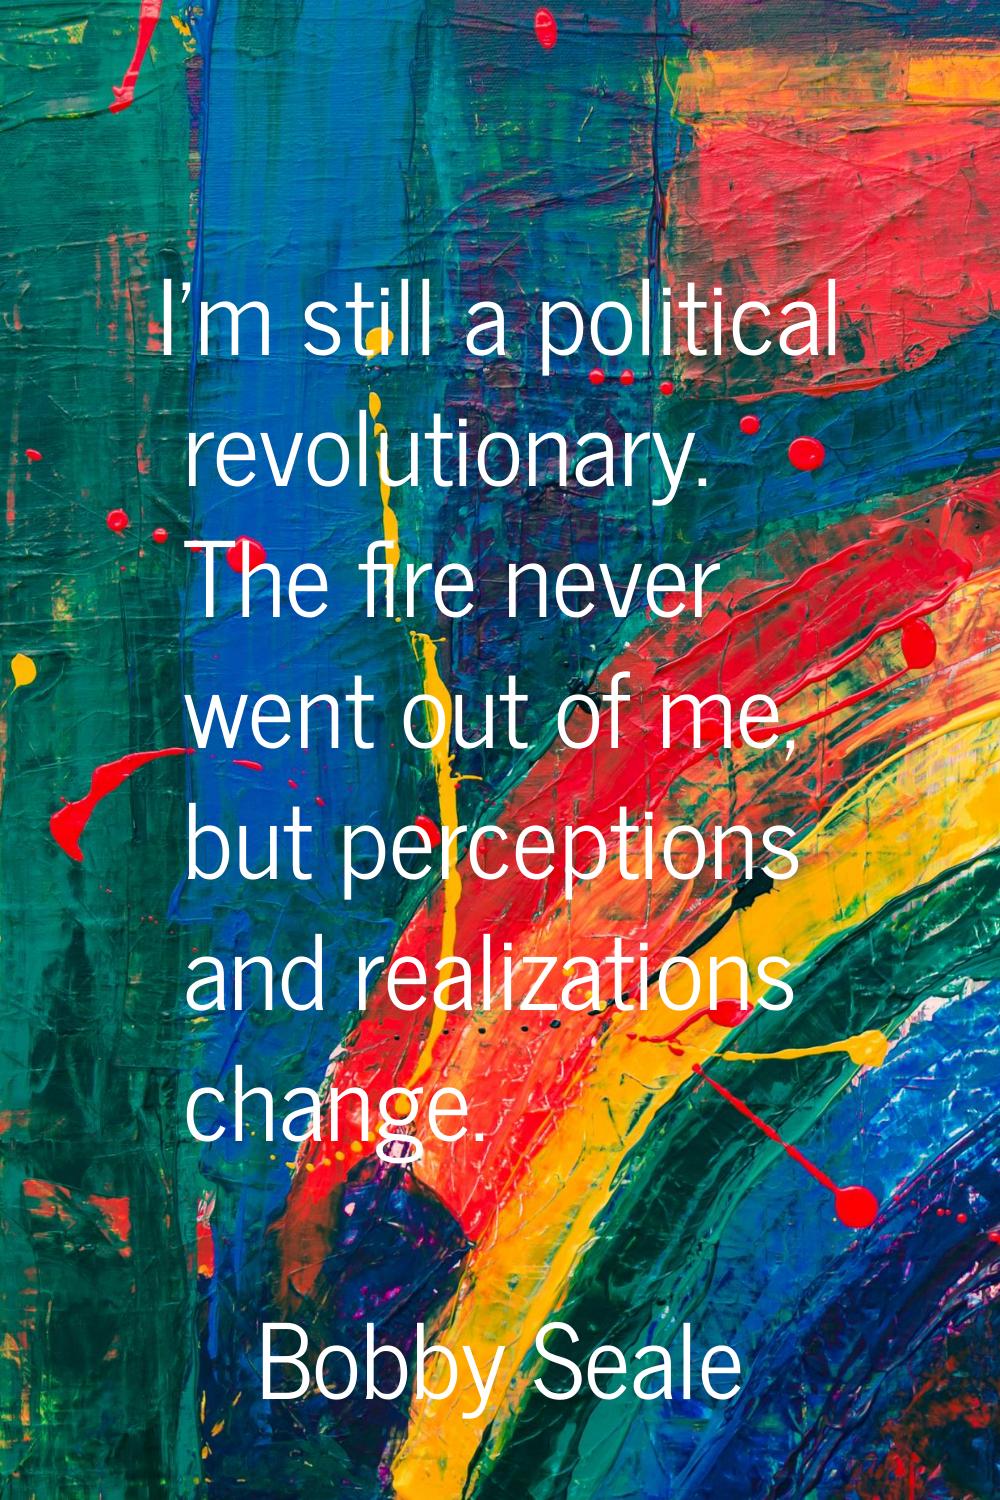 I'm still a political revolutionary. The fire never went out of me, but perceptions and realization